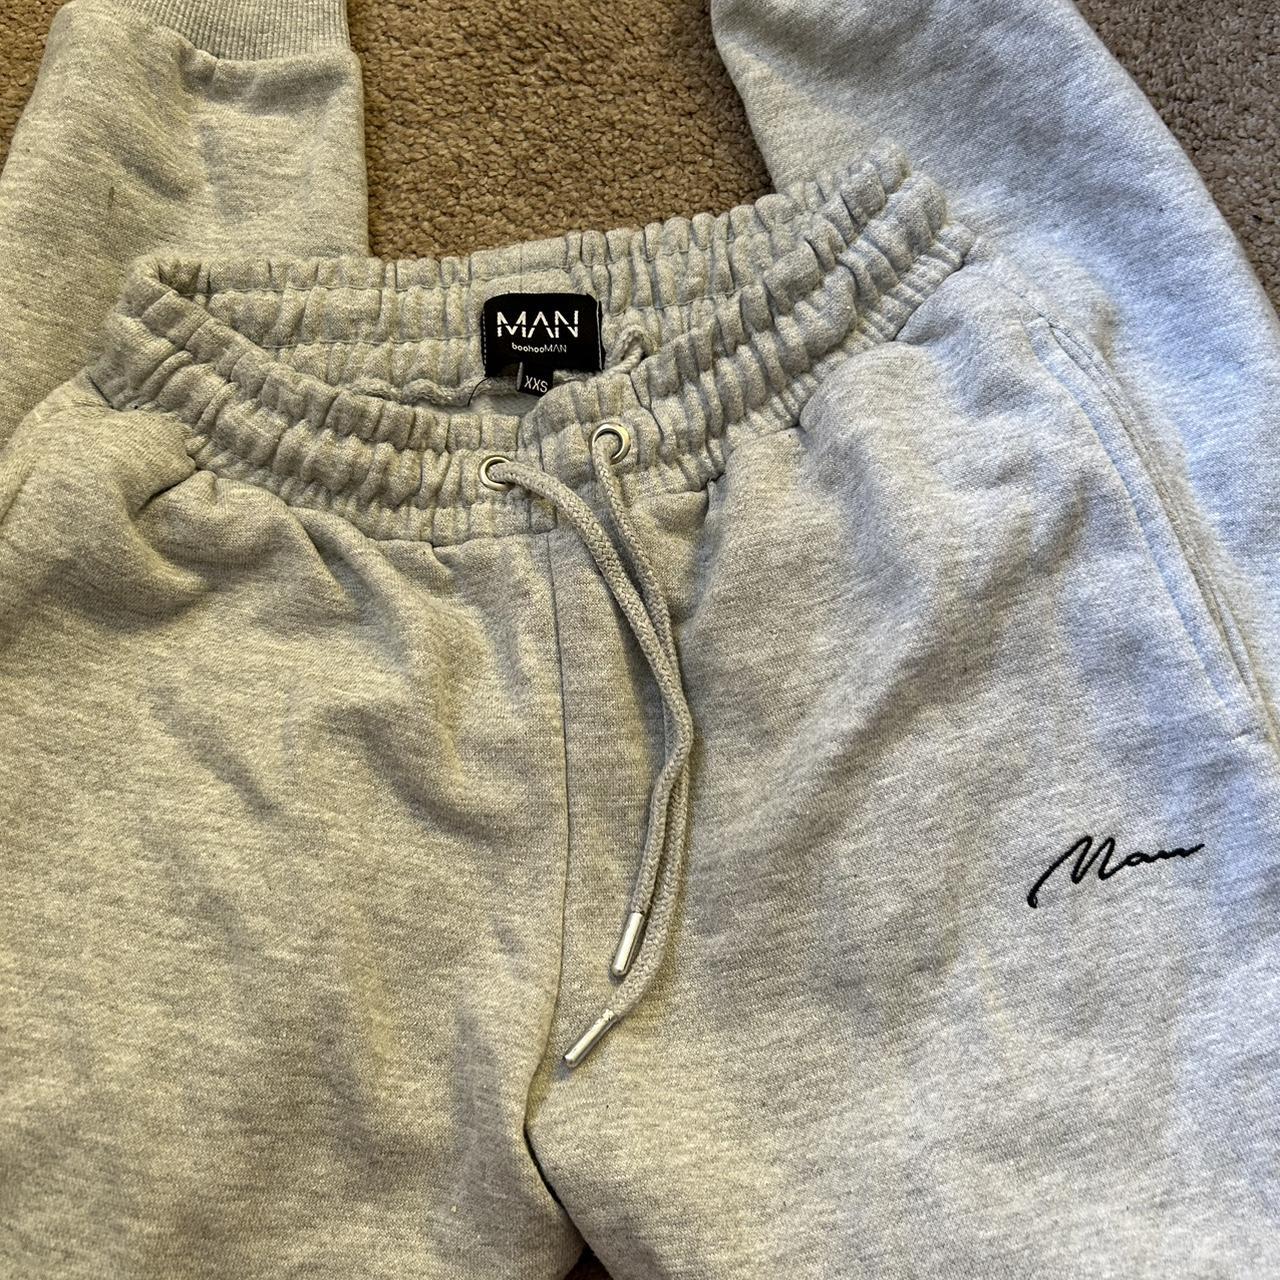 Boohoo man grey joggers. Never worn due to being too... - Depop